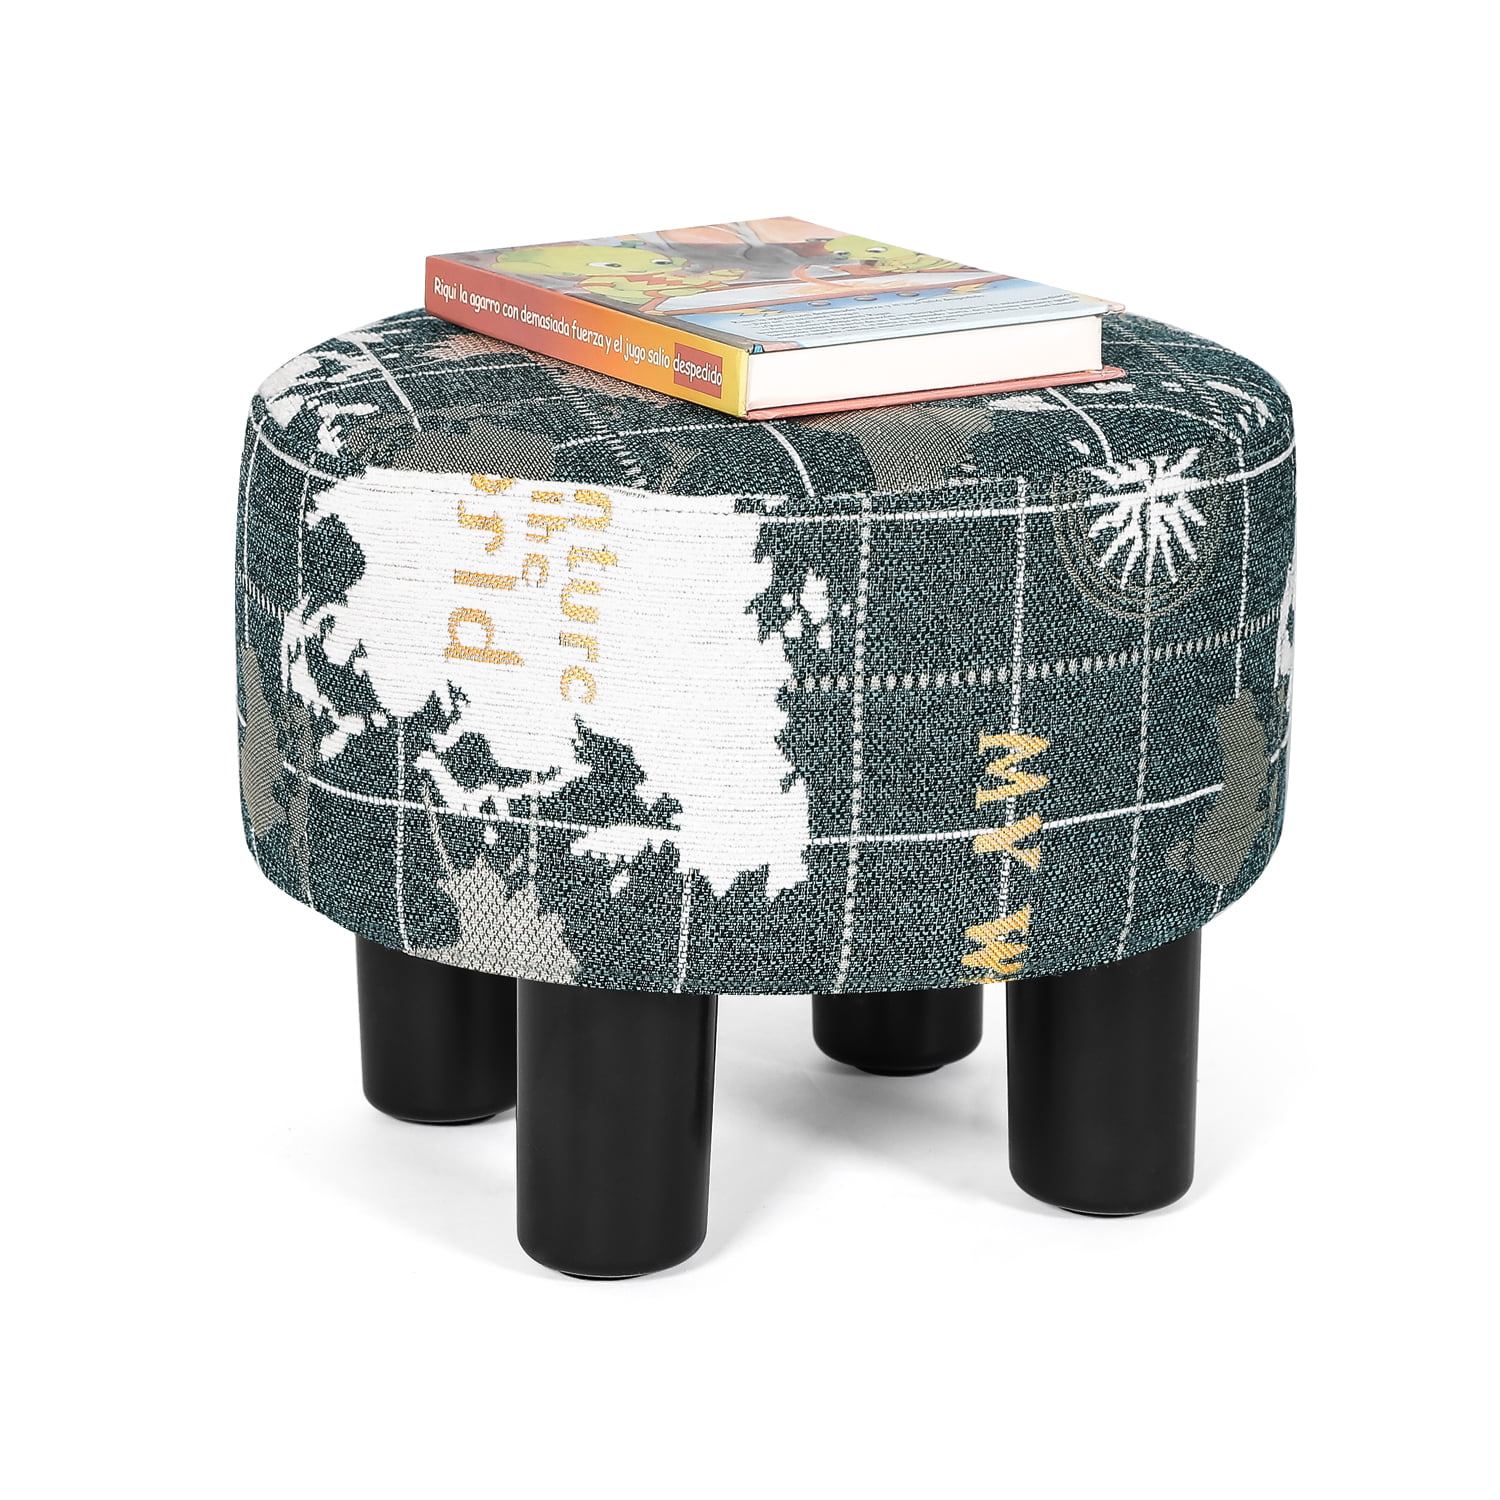 Round Ottoman Foot Rest Stool, Fabric Padded Seat with Non-Skid